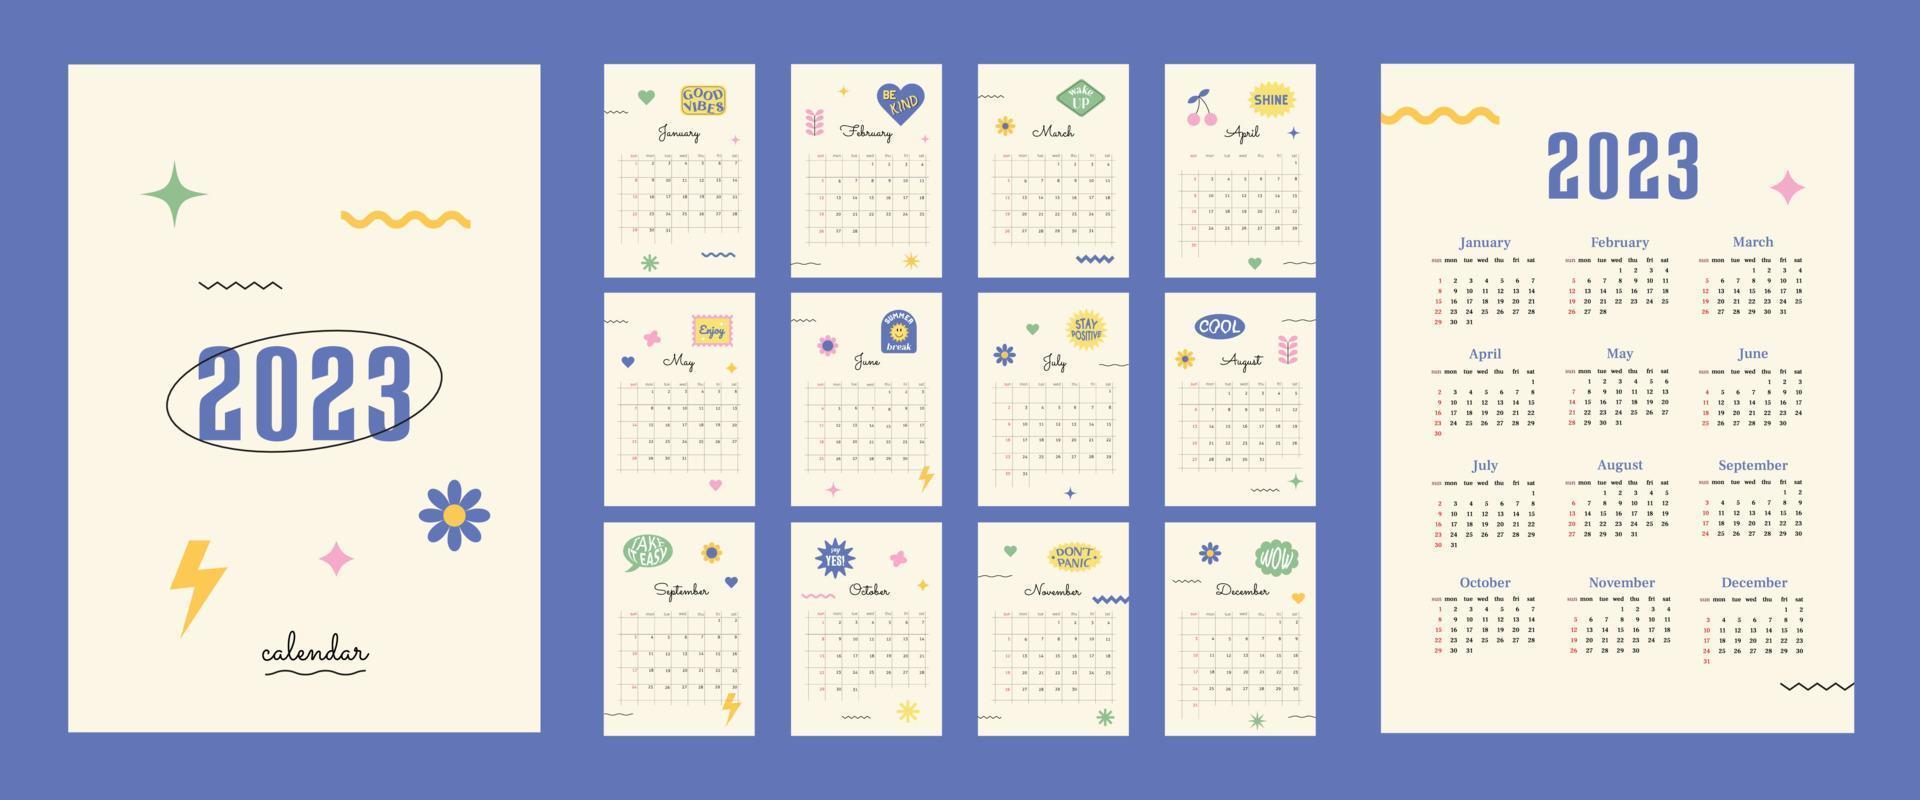 Calendar 2023 in 1990s style with square grid and retro stickers with positive phrases. Week start on Sunday. Set of 12 months, cover and one sheet of the year. Template for A4 A3 A5 size vector